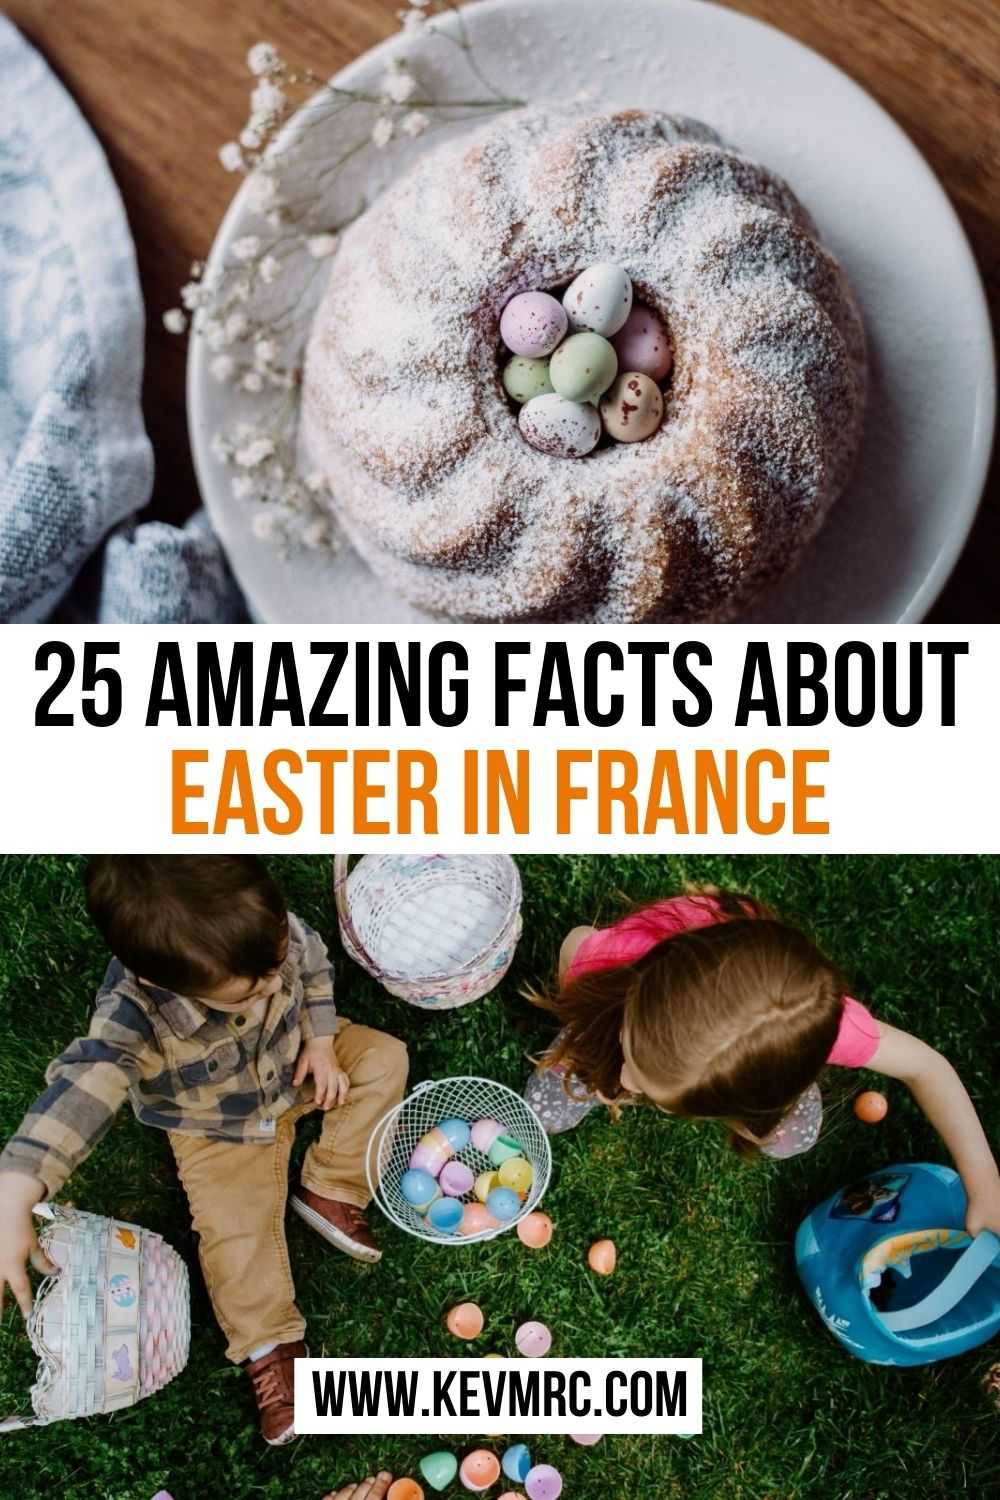 In France, the calendar celebrates the Christian Easter, which is the death and resurrection of Jesus. For the French, Easter is associated with a public holiday on Monday and chocolate eggs, brought by bells or the Easter bunny depending on the region. Discover some interesting facts about Easter in France. french easter traditions | easter traditions in france | france easter 